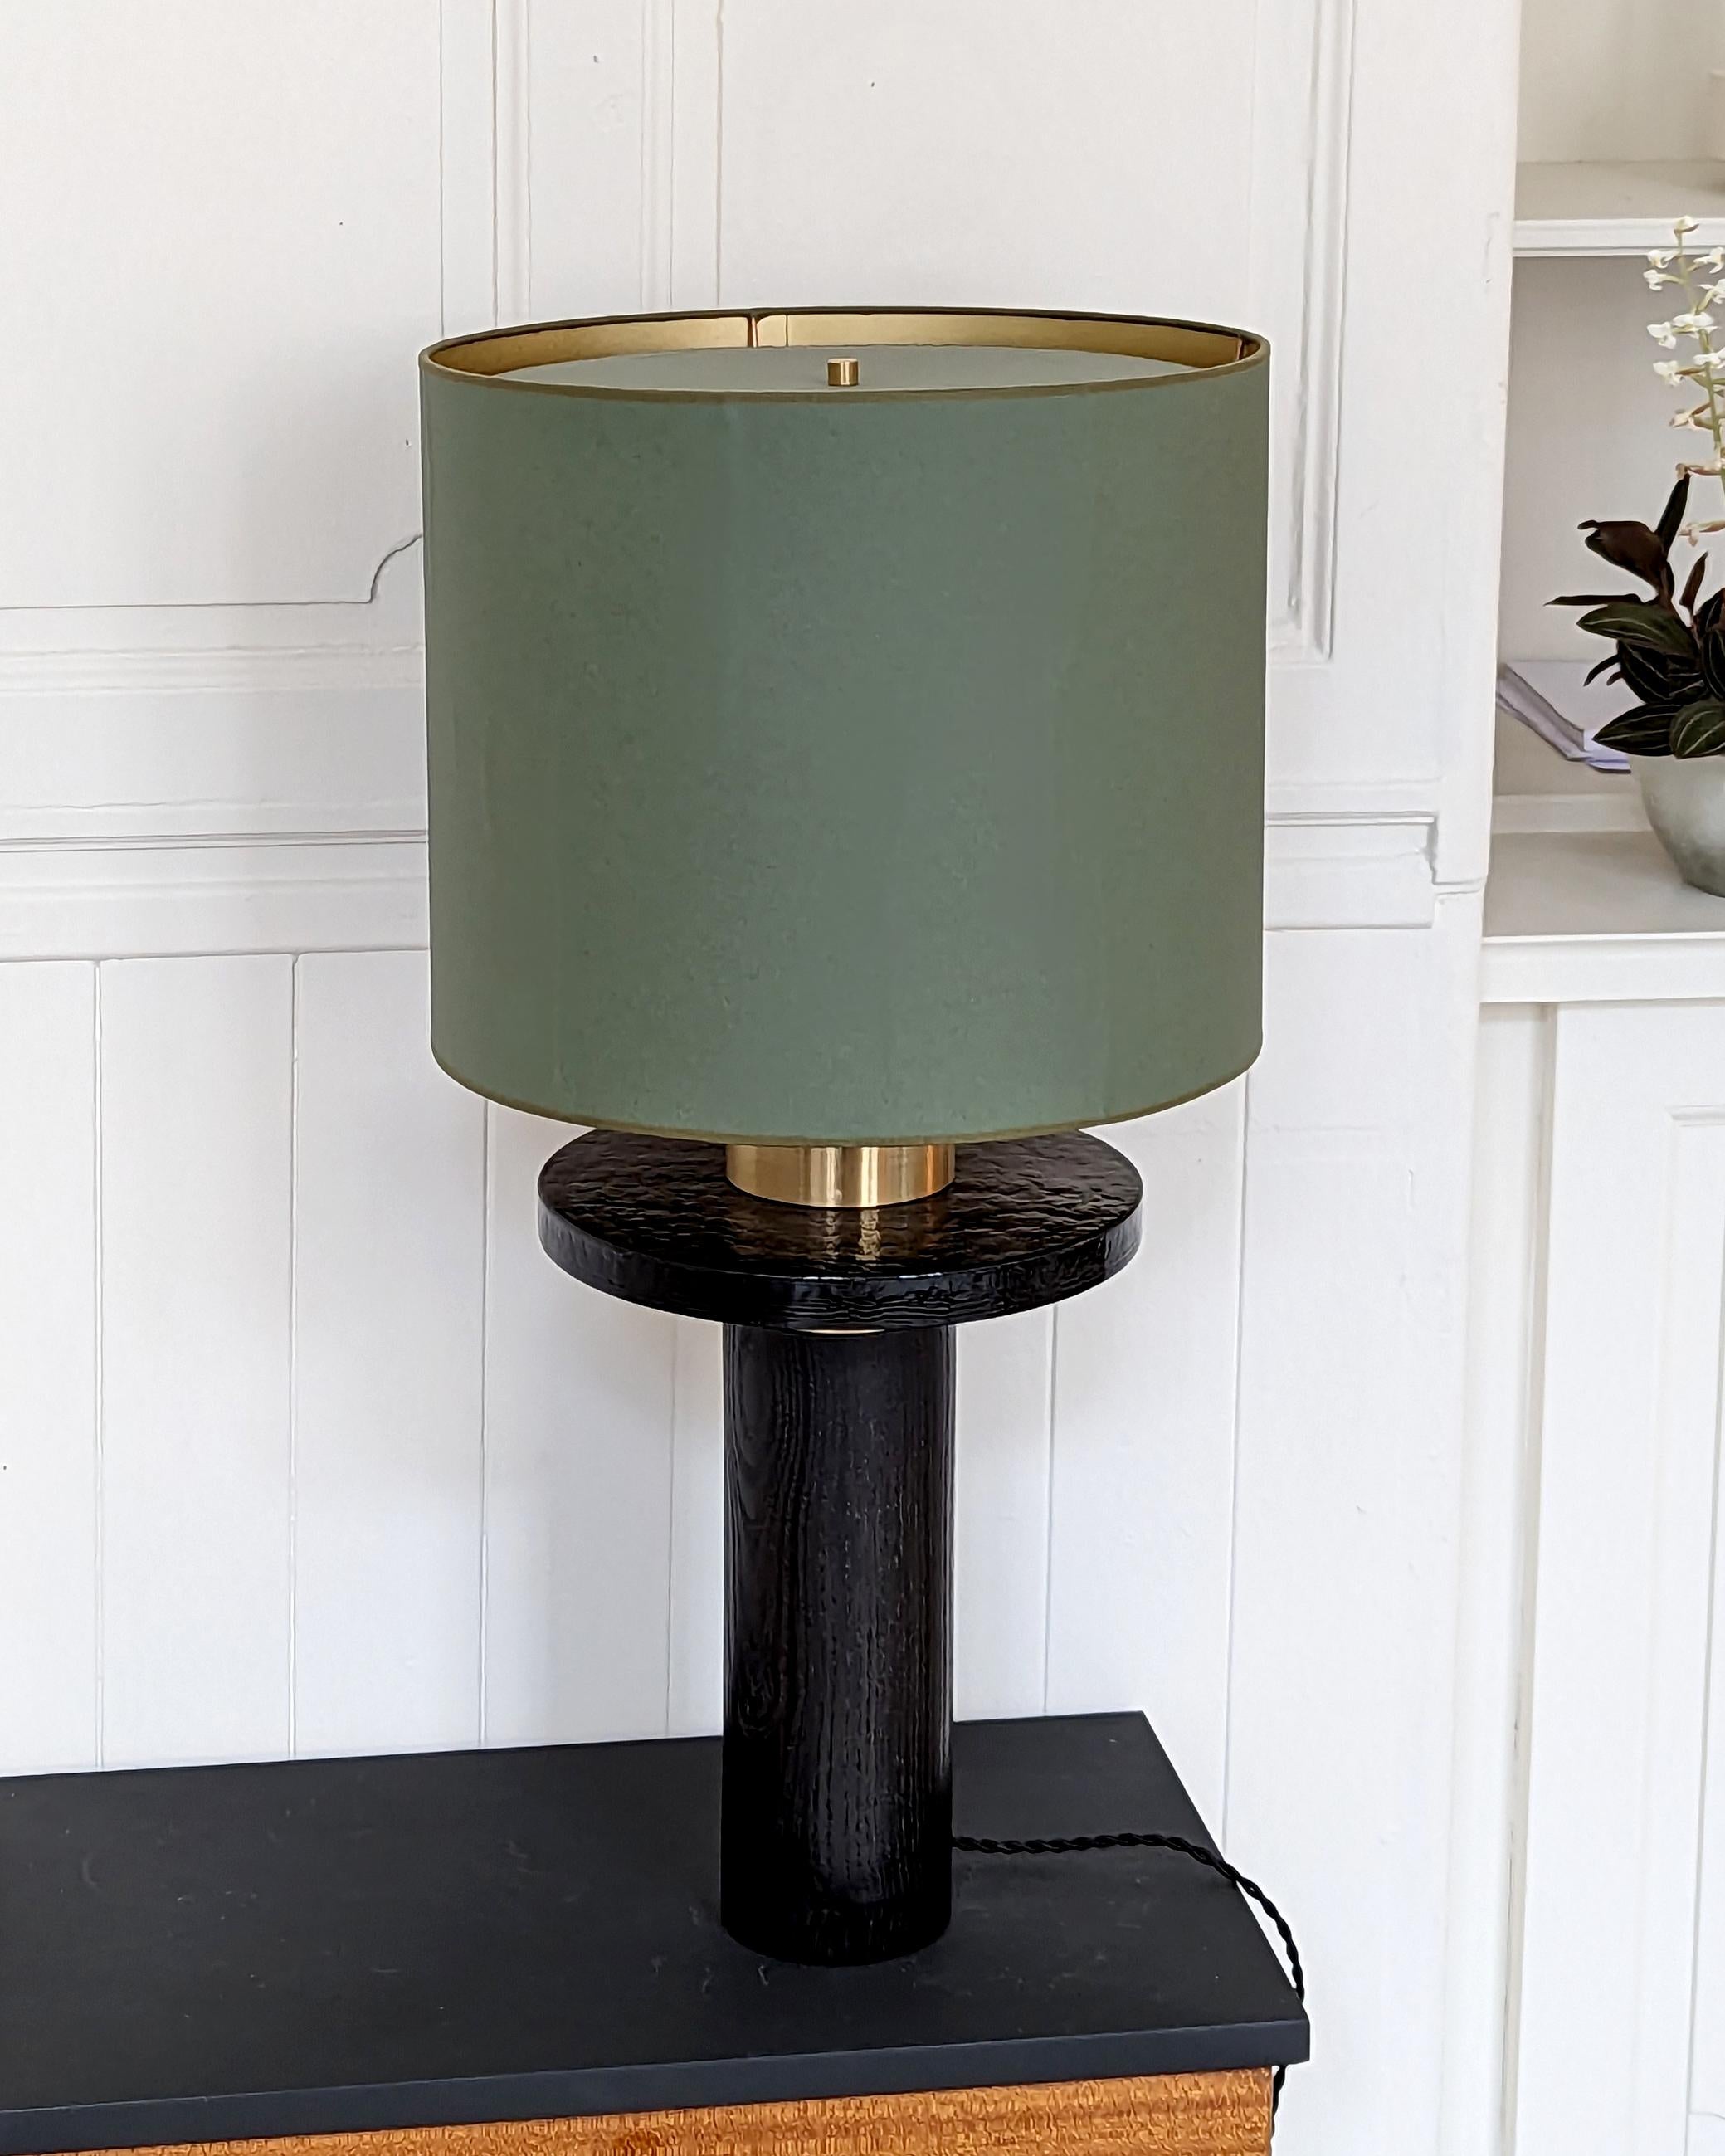 The Ines lamp combines cast glass and oxidized wood to create an indispensable and exquisite piece. Its paper lampshade delicately diffuses a soft, warm light, adding a gentle ambiance to any space it graces.
This lamp is suitable for lighting a